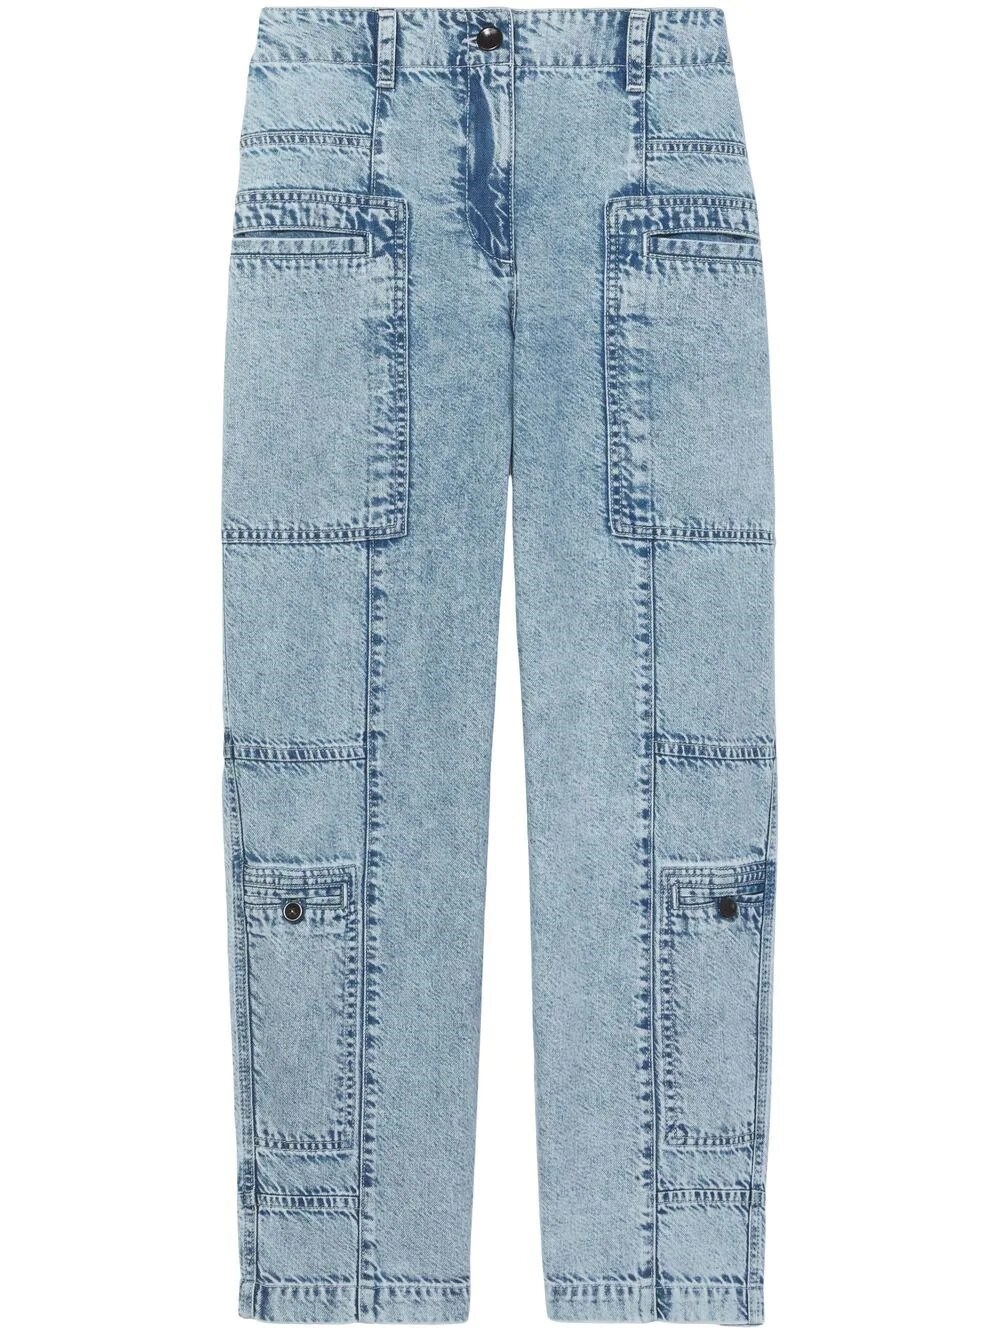 Proenza Schouler White Label Cropped Chambray Utility Pants In Light Indigo